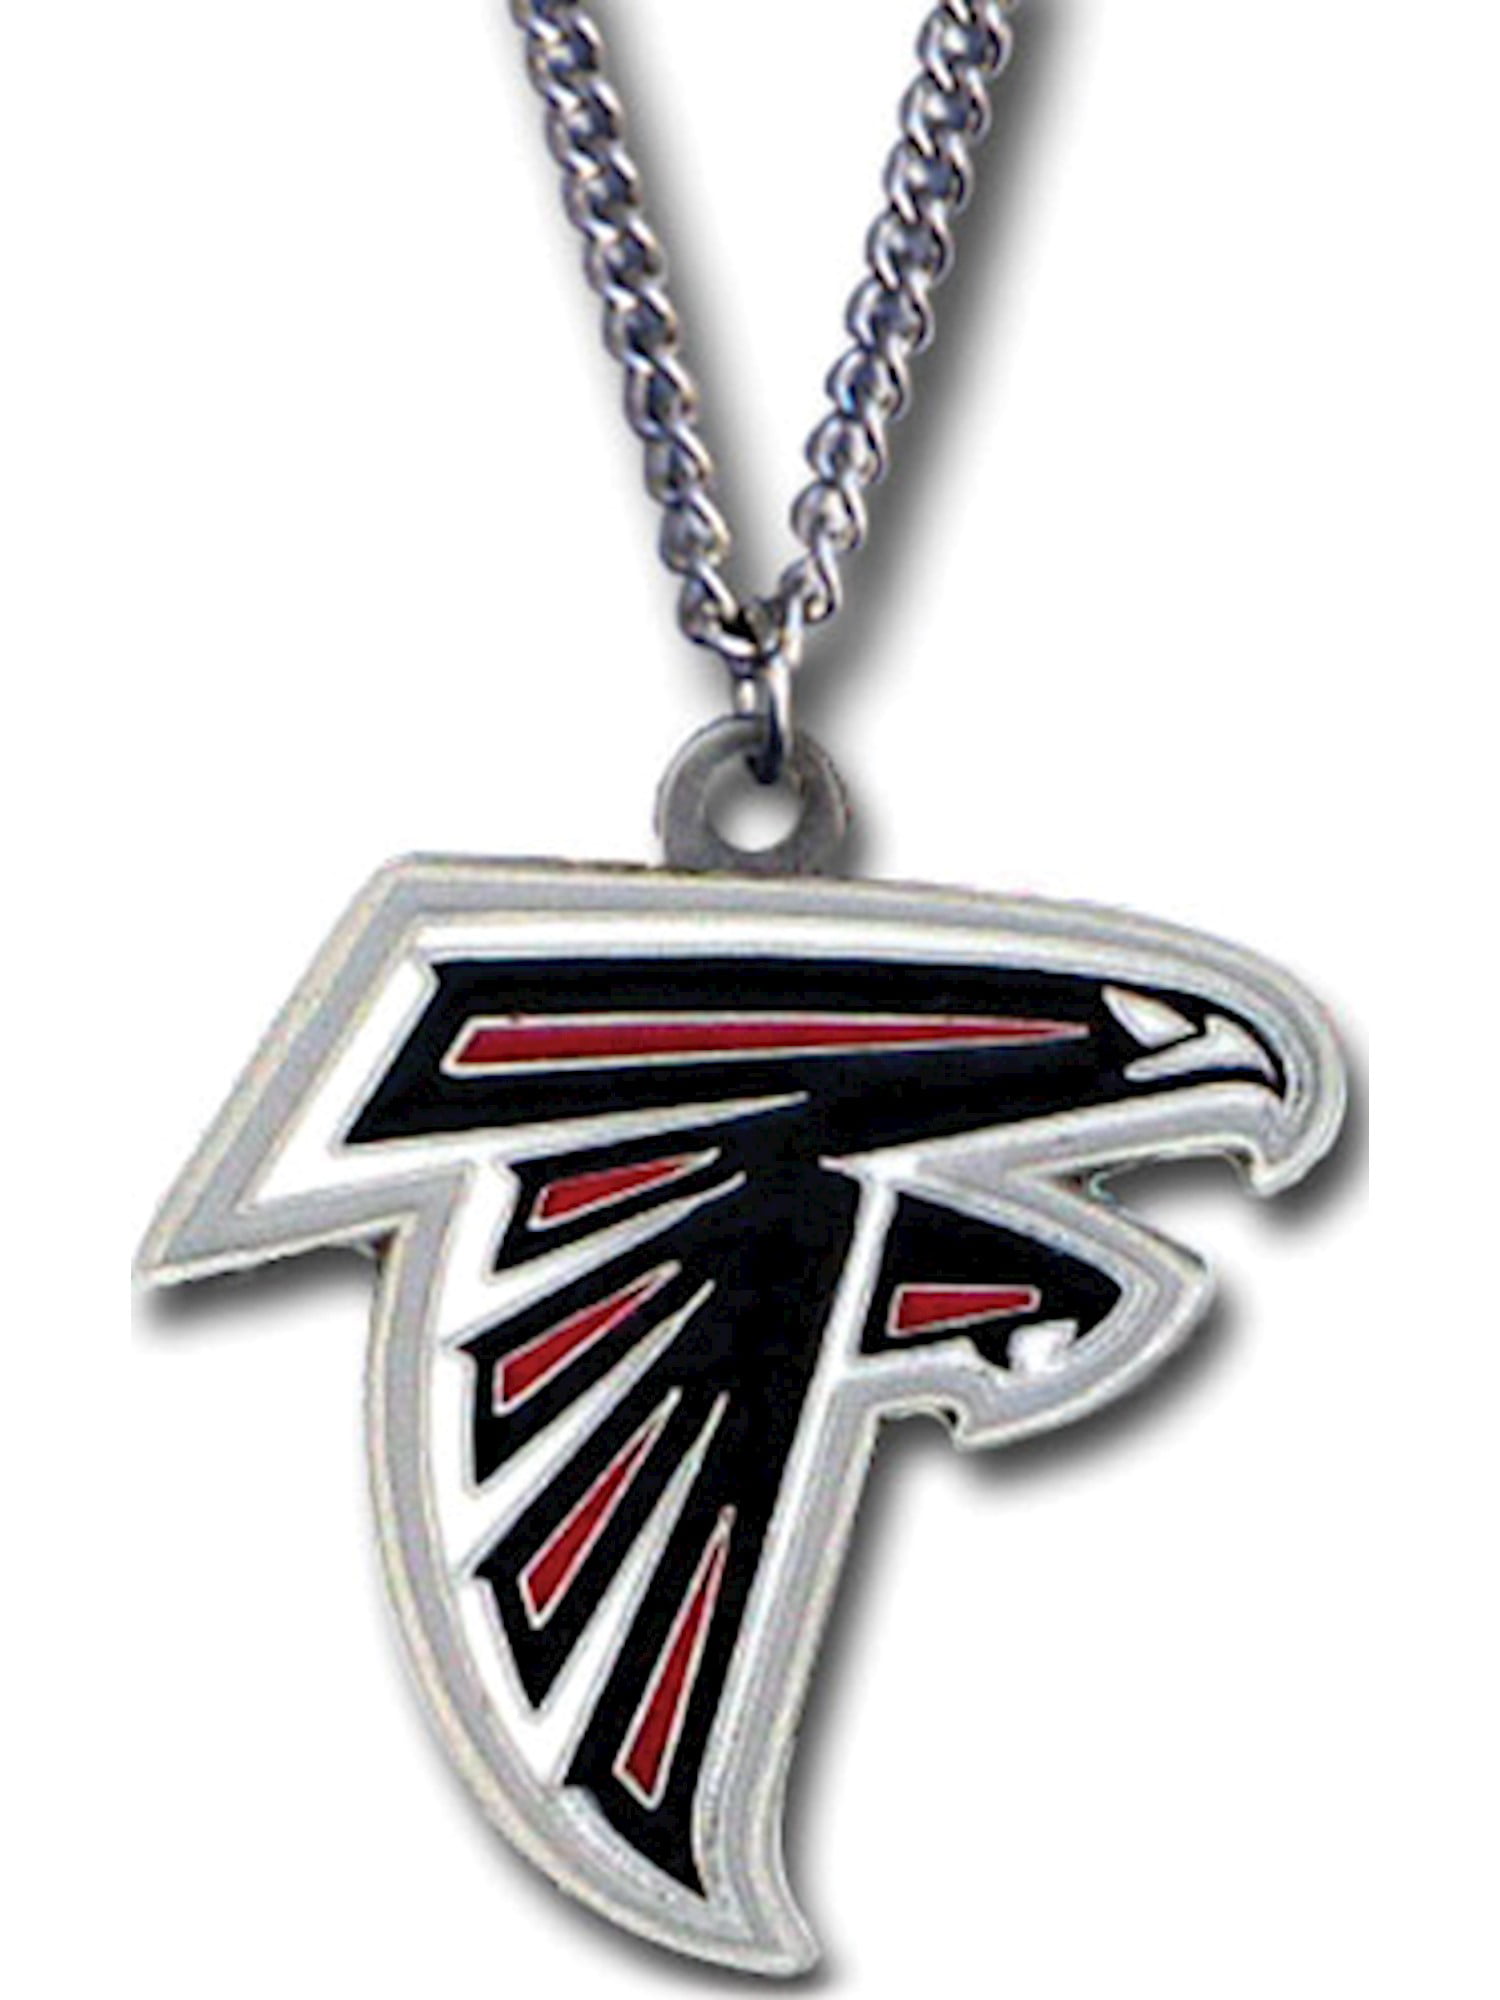 Nfl Falcons 20 Inch Chain Necklace Designer Jewelry by Sweet Pea